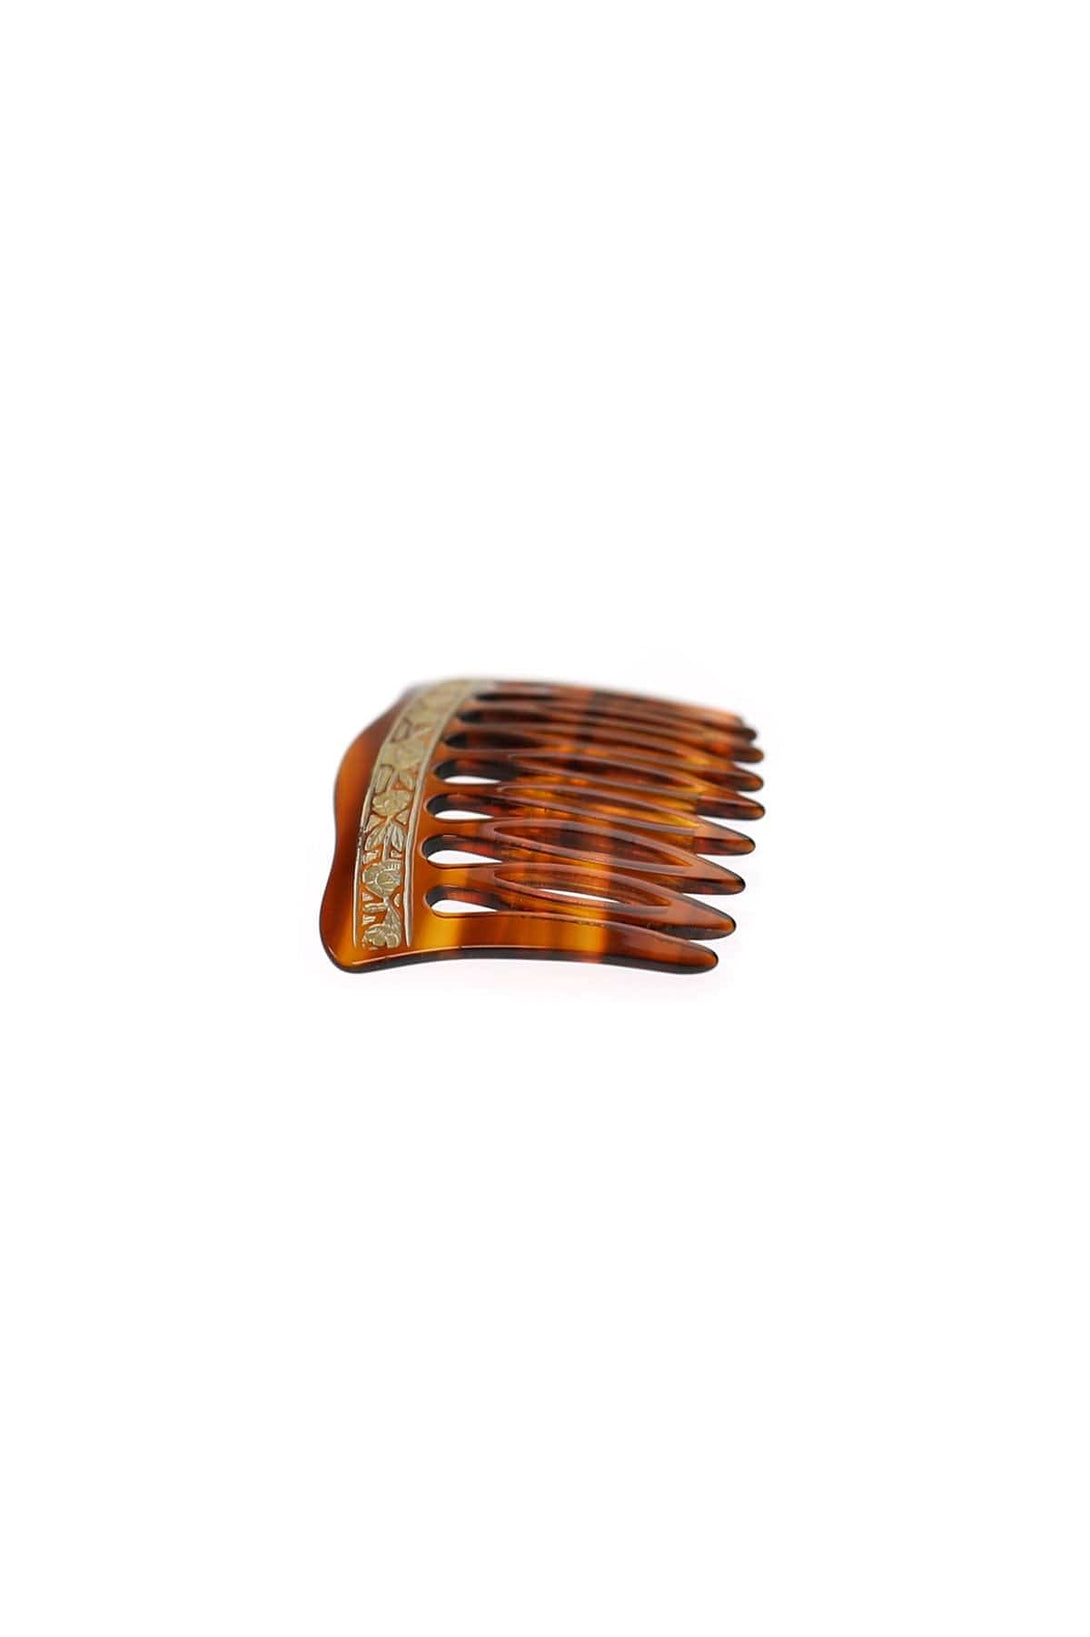 Vintage French Inspired Gold Stamped Tortoise Shell Hair Comb